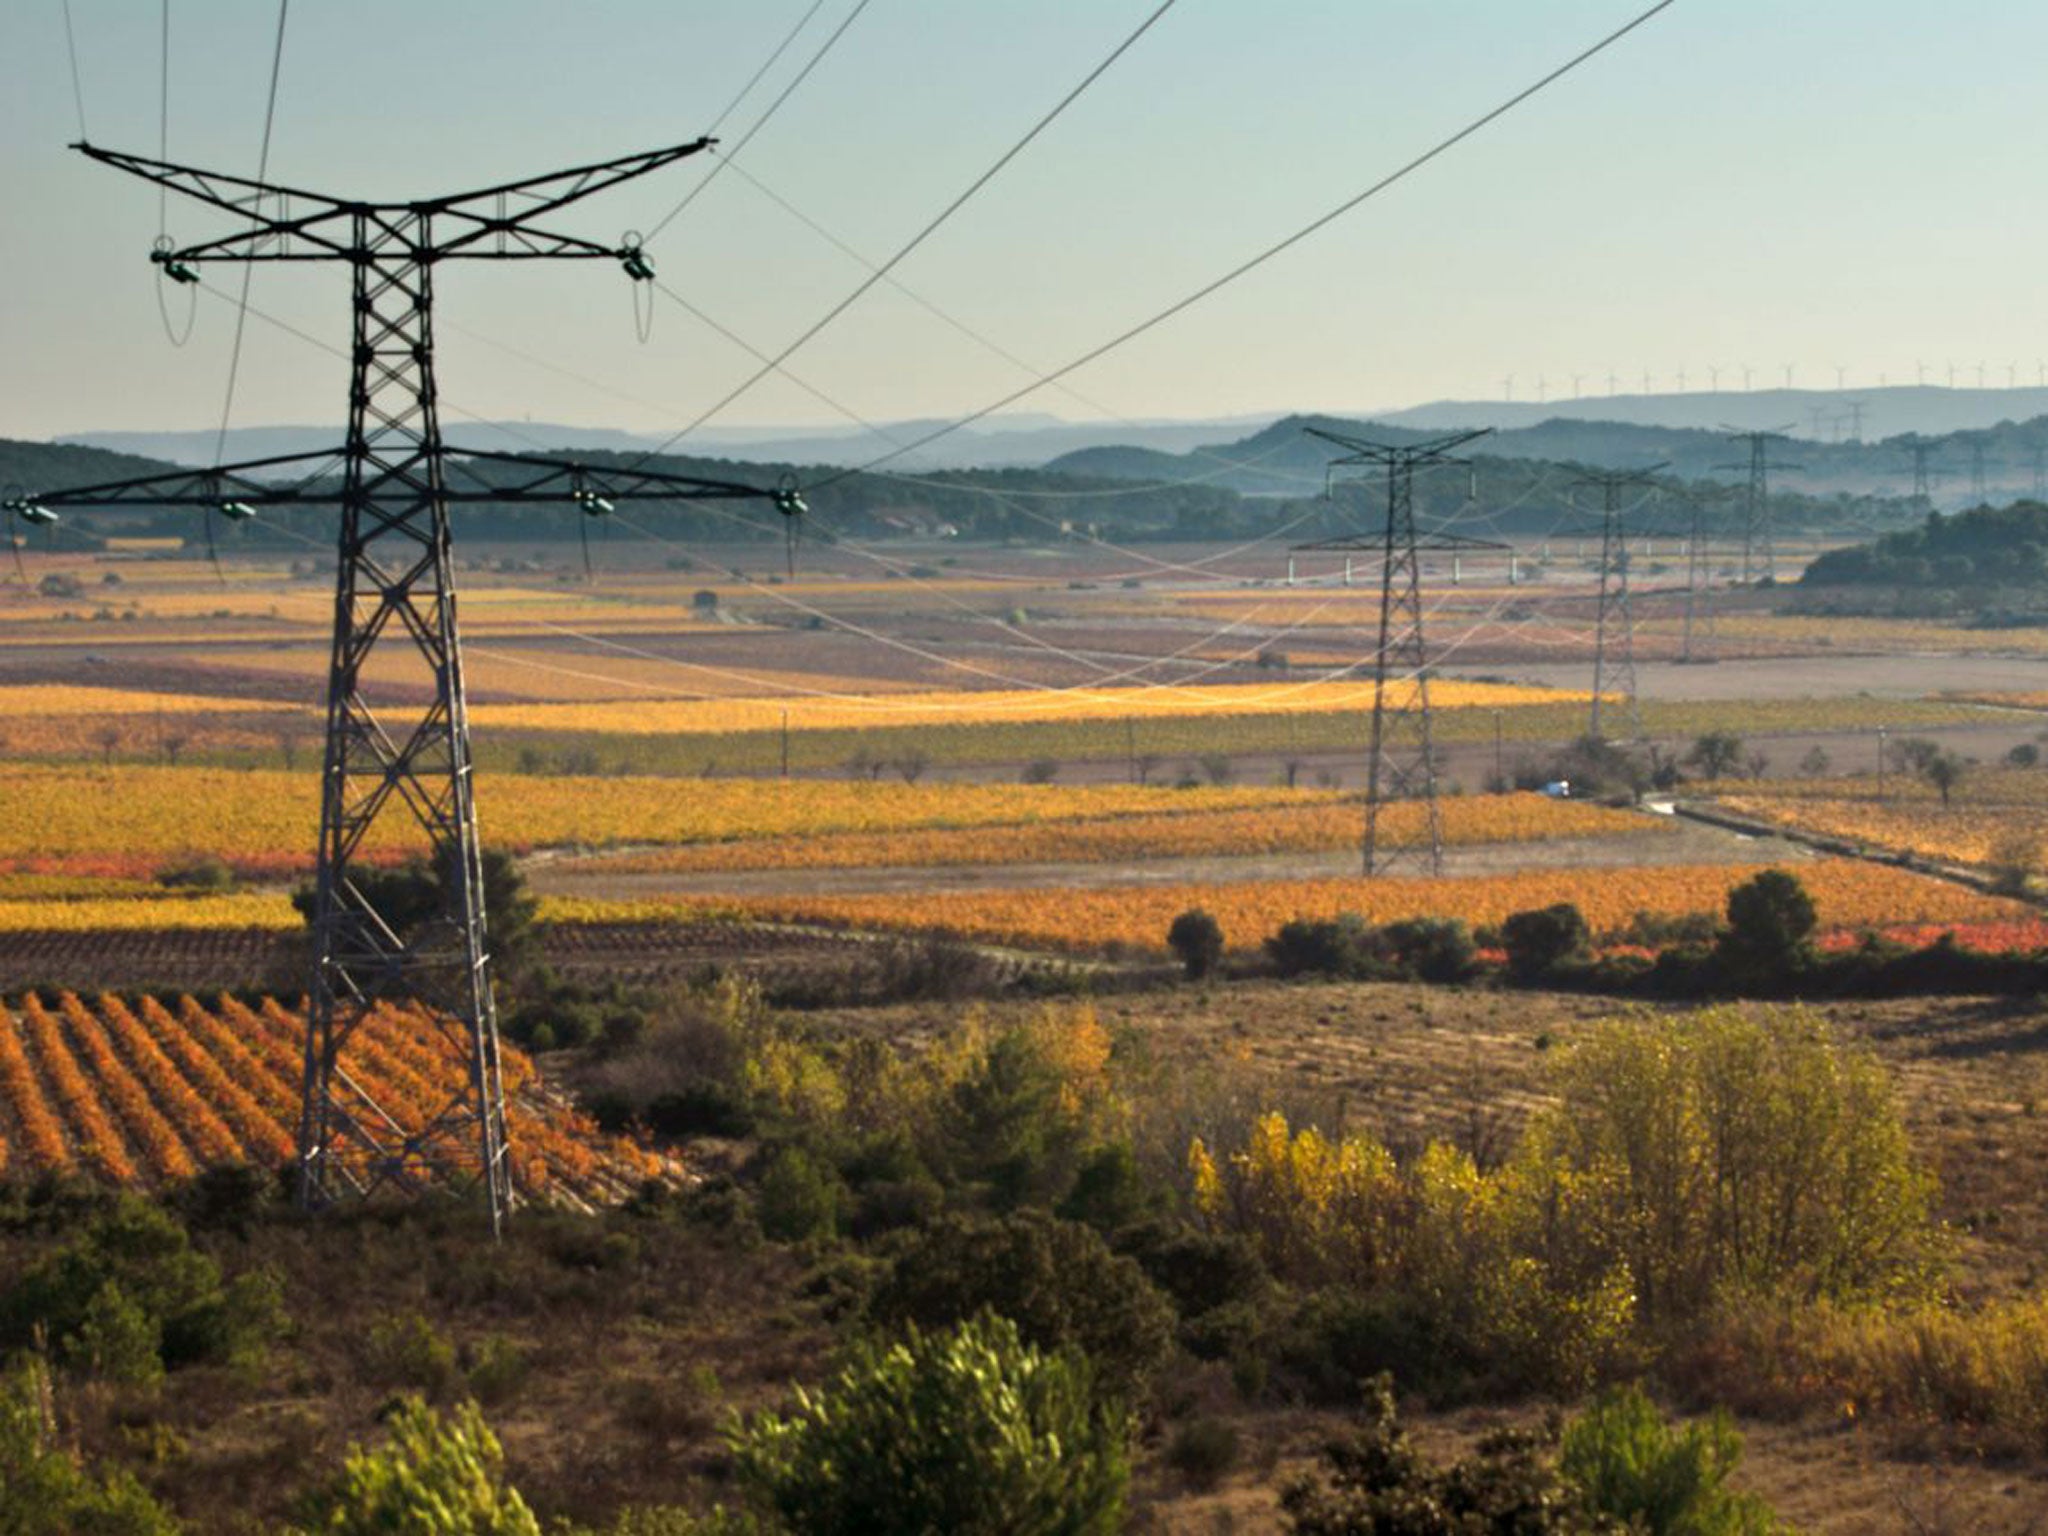 Electricity pylons in the Languedoc, France in Villejust, near Paris